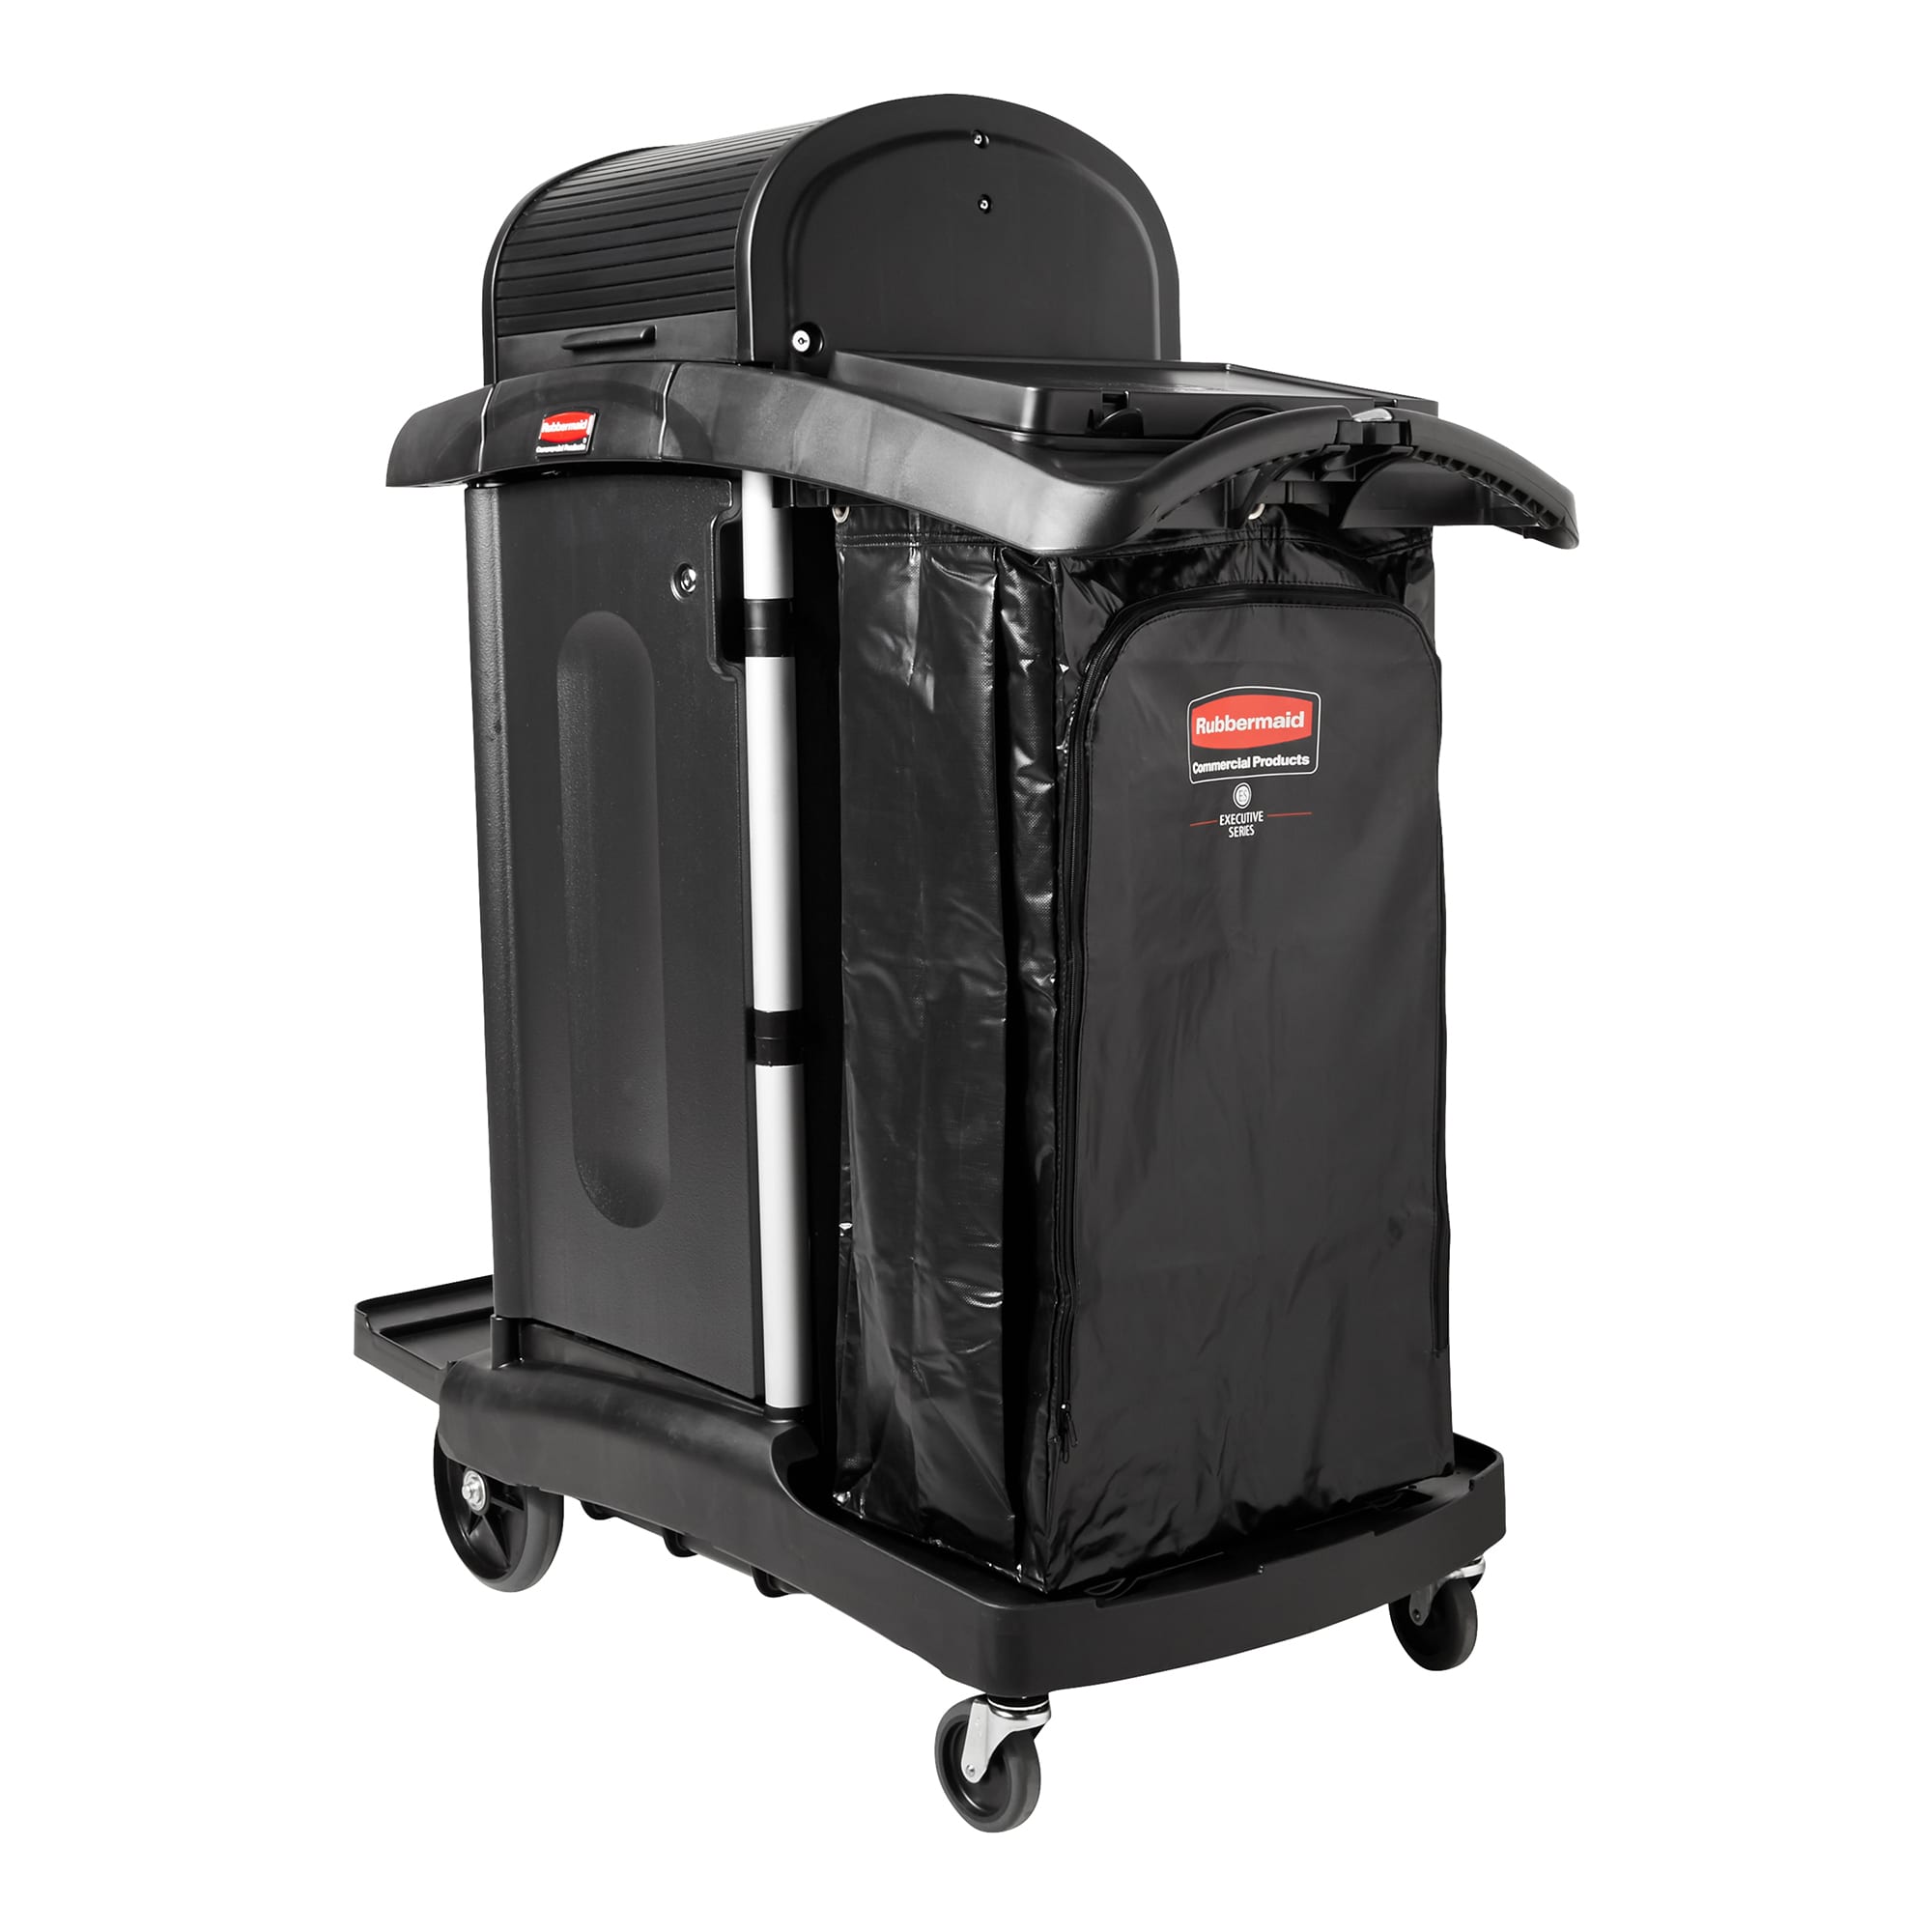 Rubbermaid® 1861427 Executive Series High Security Janitorial Cart